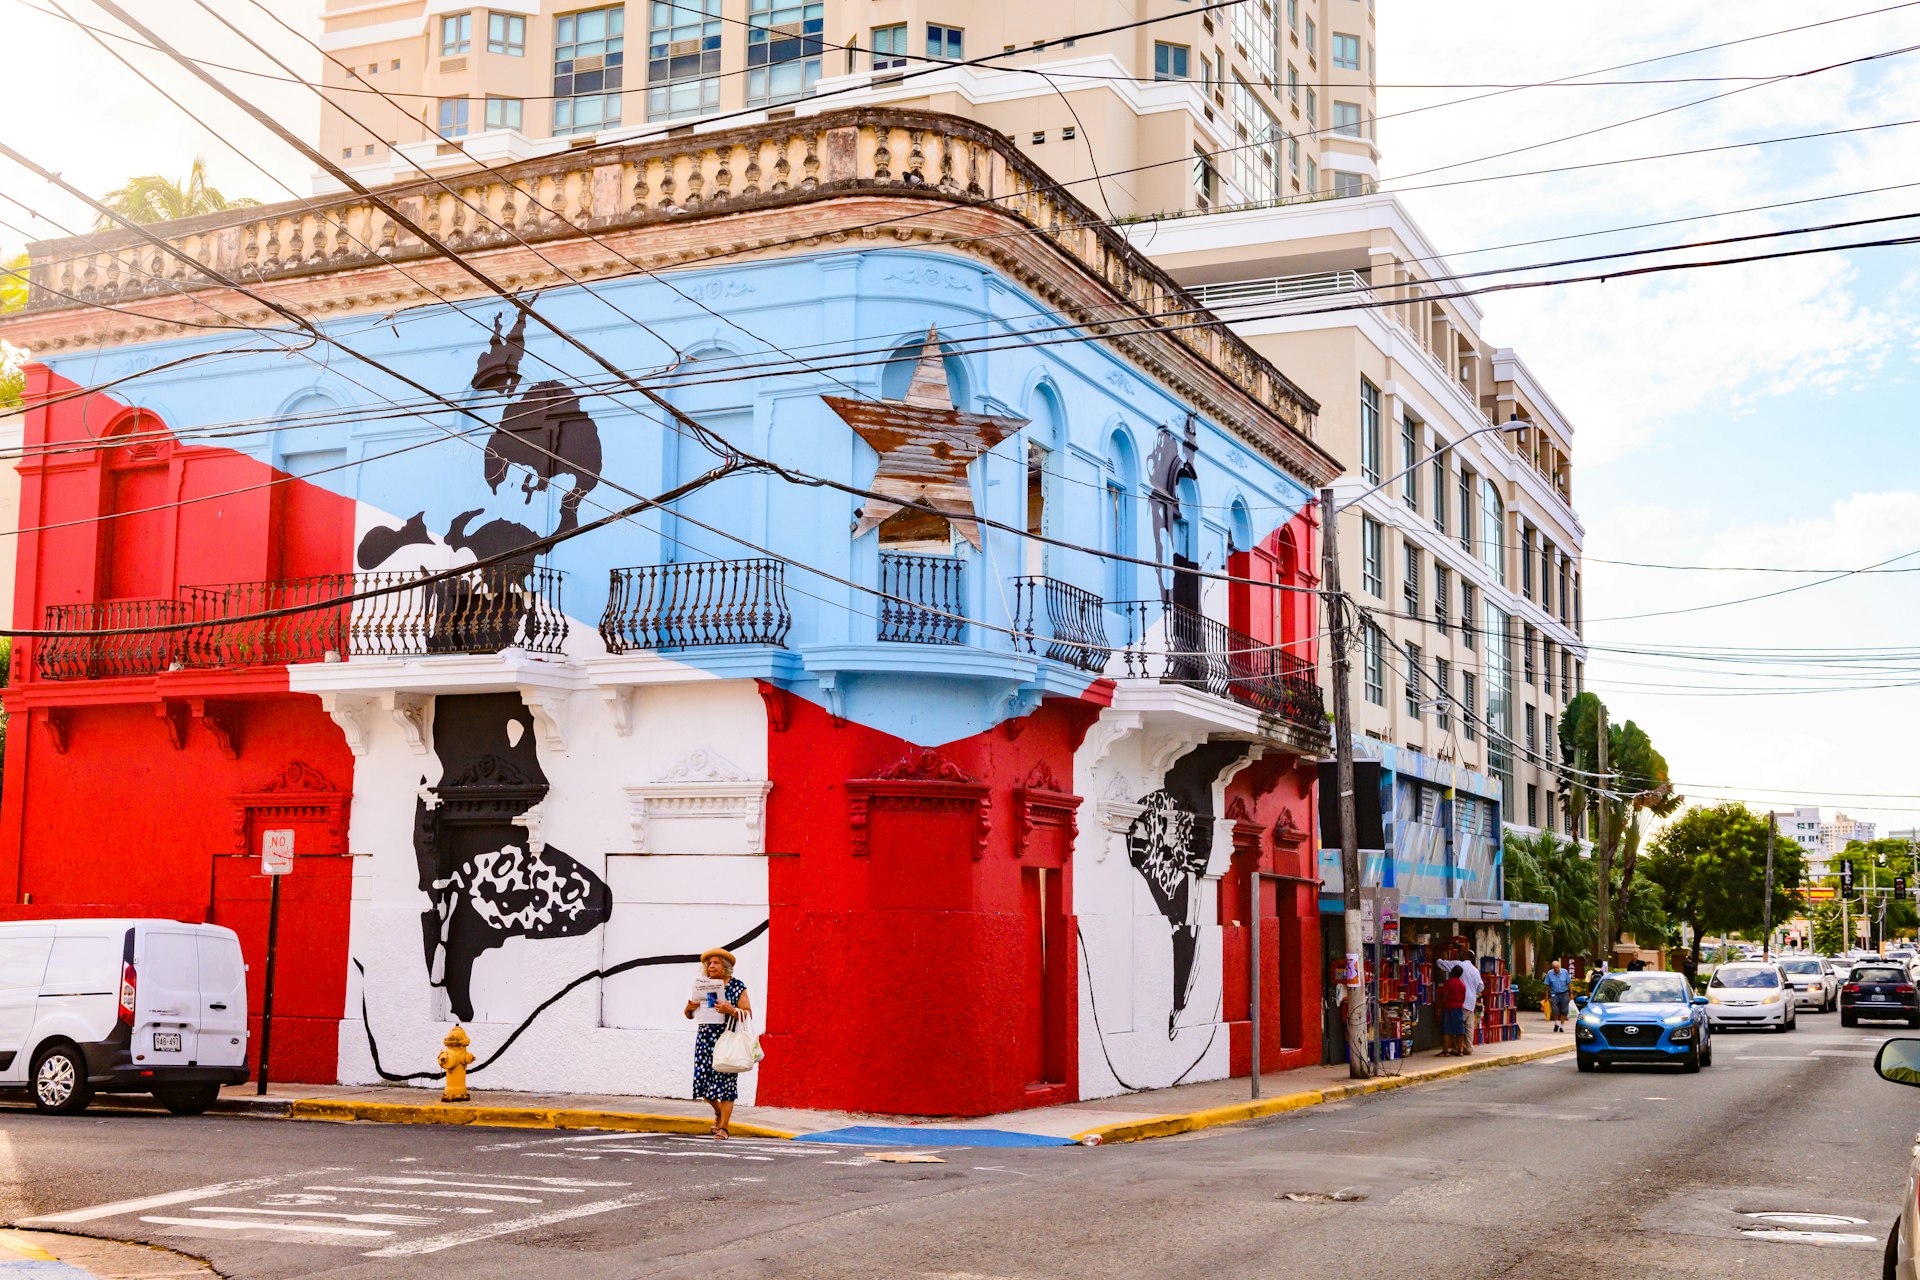 A street scene on Calle Loiza in the Santurce neighborhood of San Juan, Puerto Rico. A corner building is painted with the Puerto Rican flag. Cars and people can be seen along the street and sidewalk.